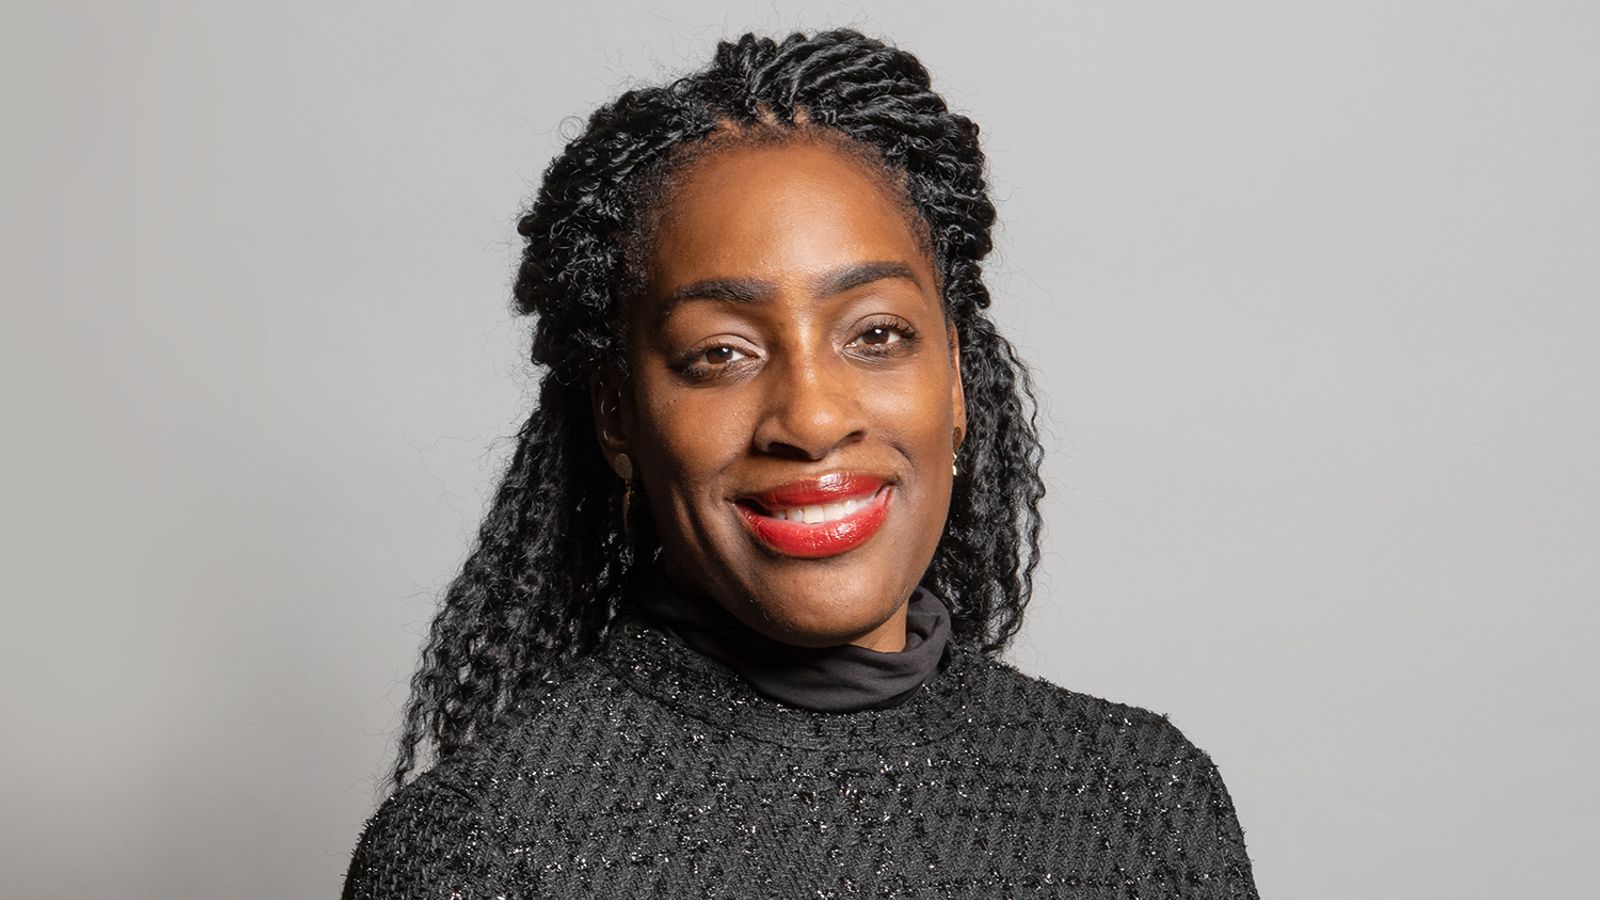 Labour MP Kate Osamor has whip suspended after Gaza comment in Holocaust Memorial Day post